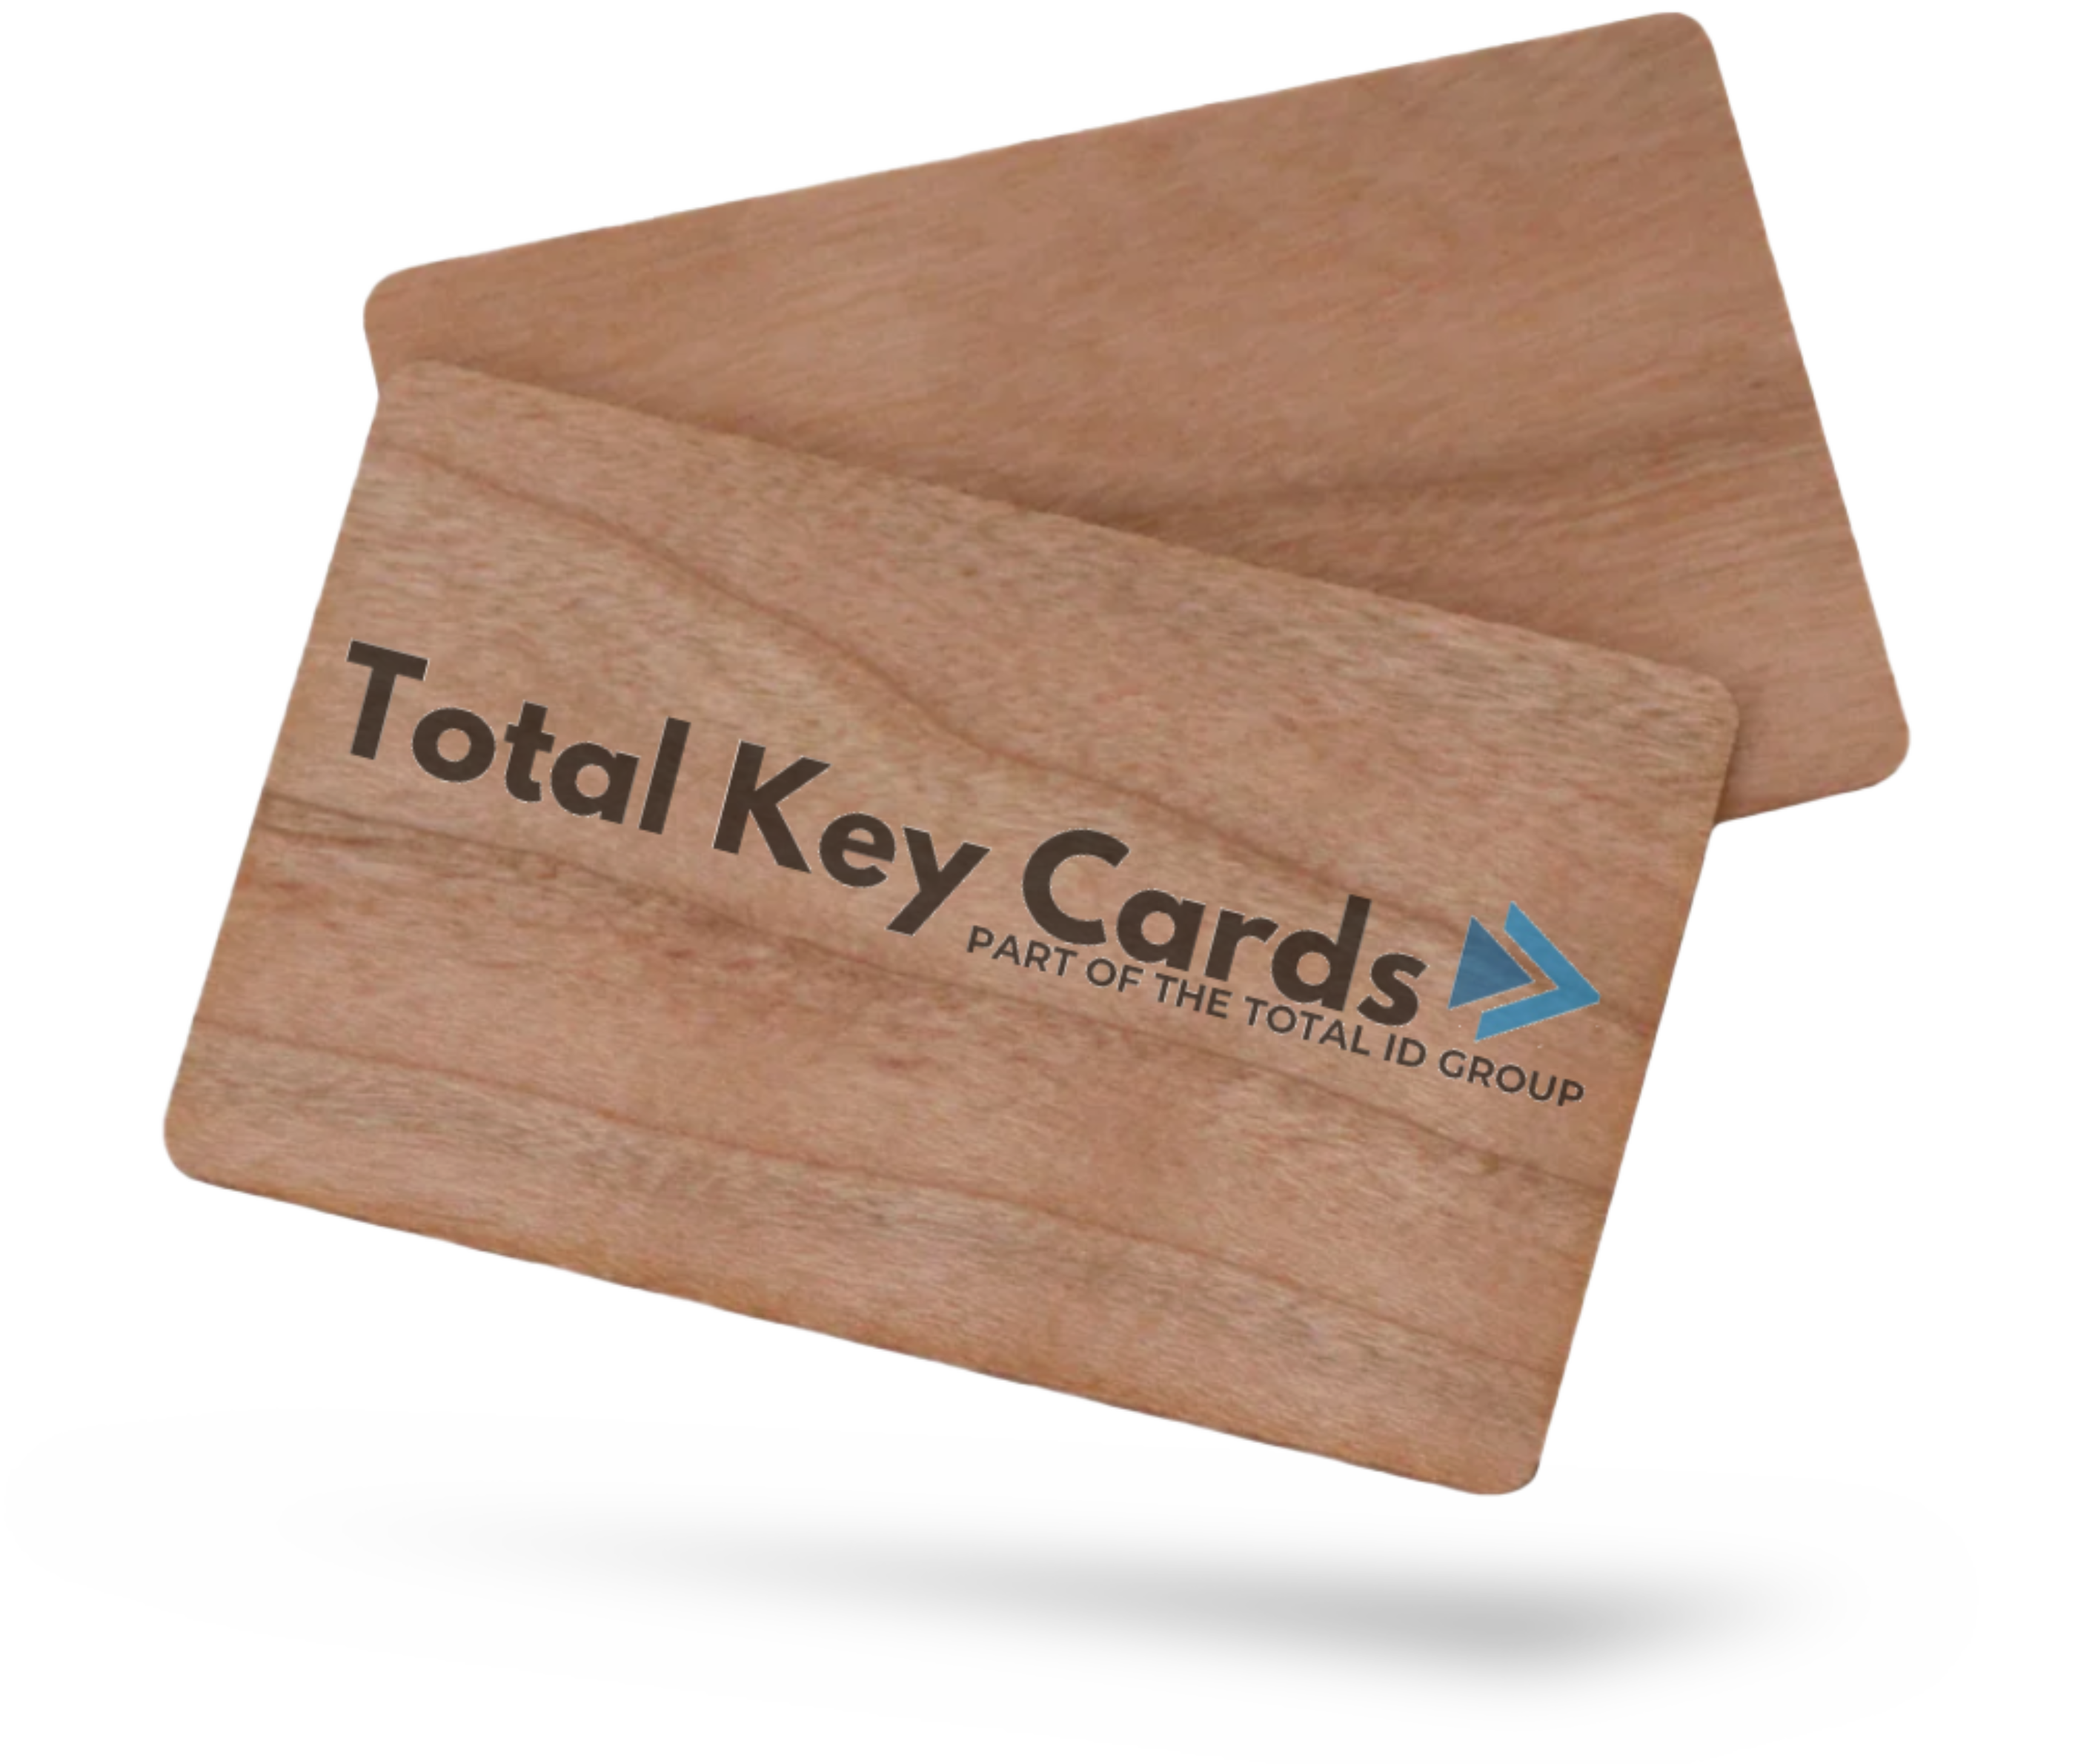 Wooden key card image 002